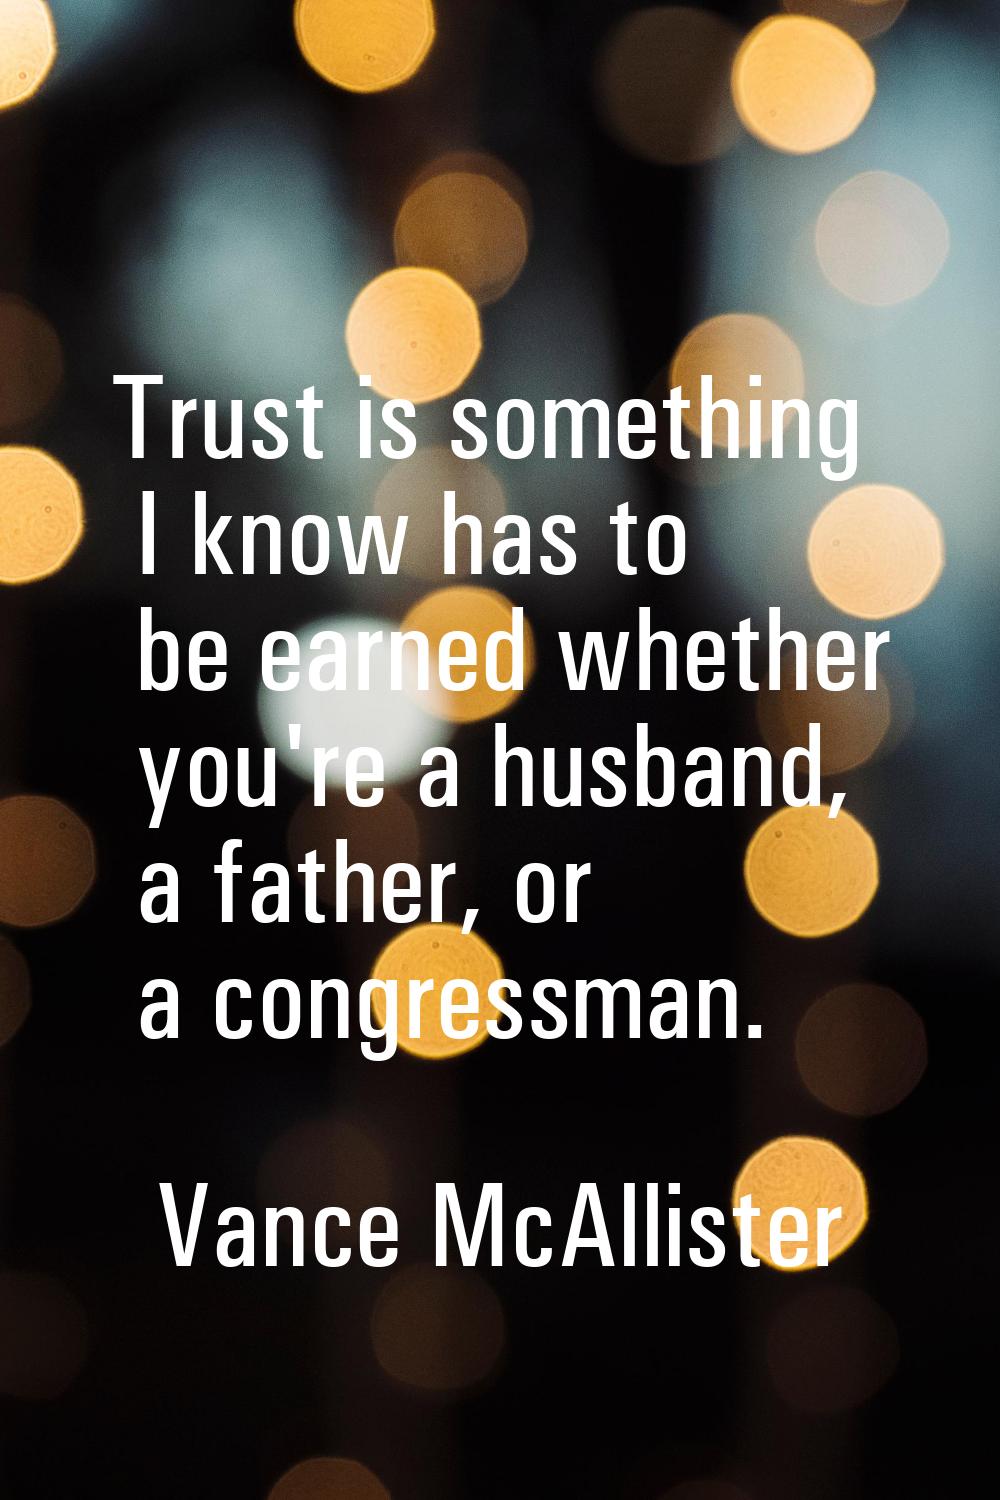 Trust is something I know has to be earned whether you're a husband, a father, or a congressman.